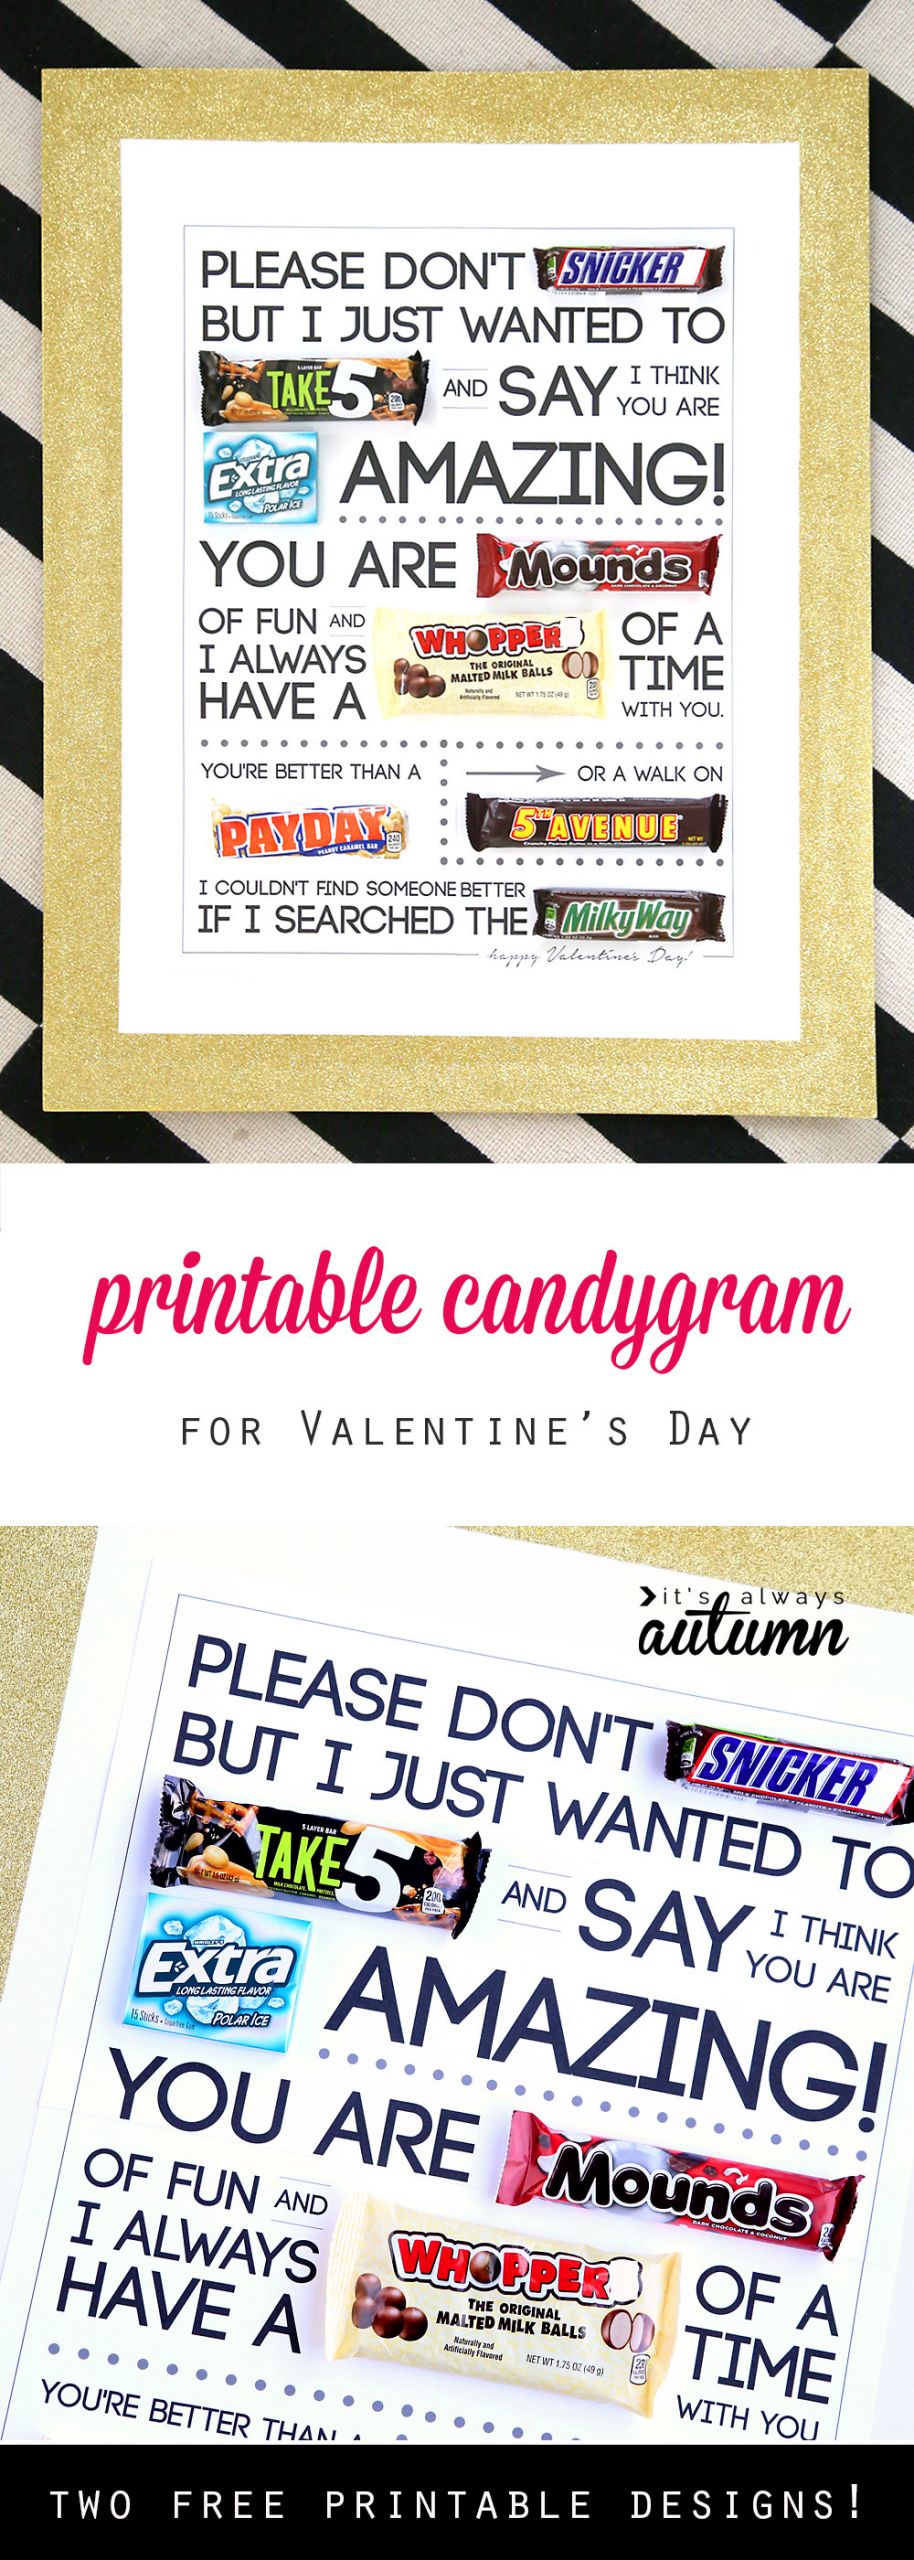 Valentines Day Candy Poster
 Free printable Valentine s Day candygram candy poster